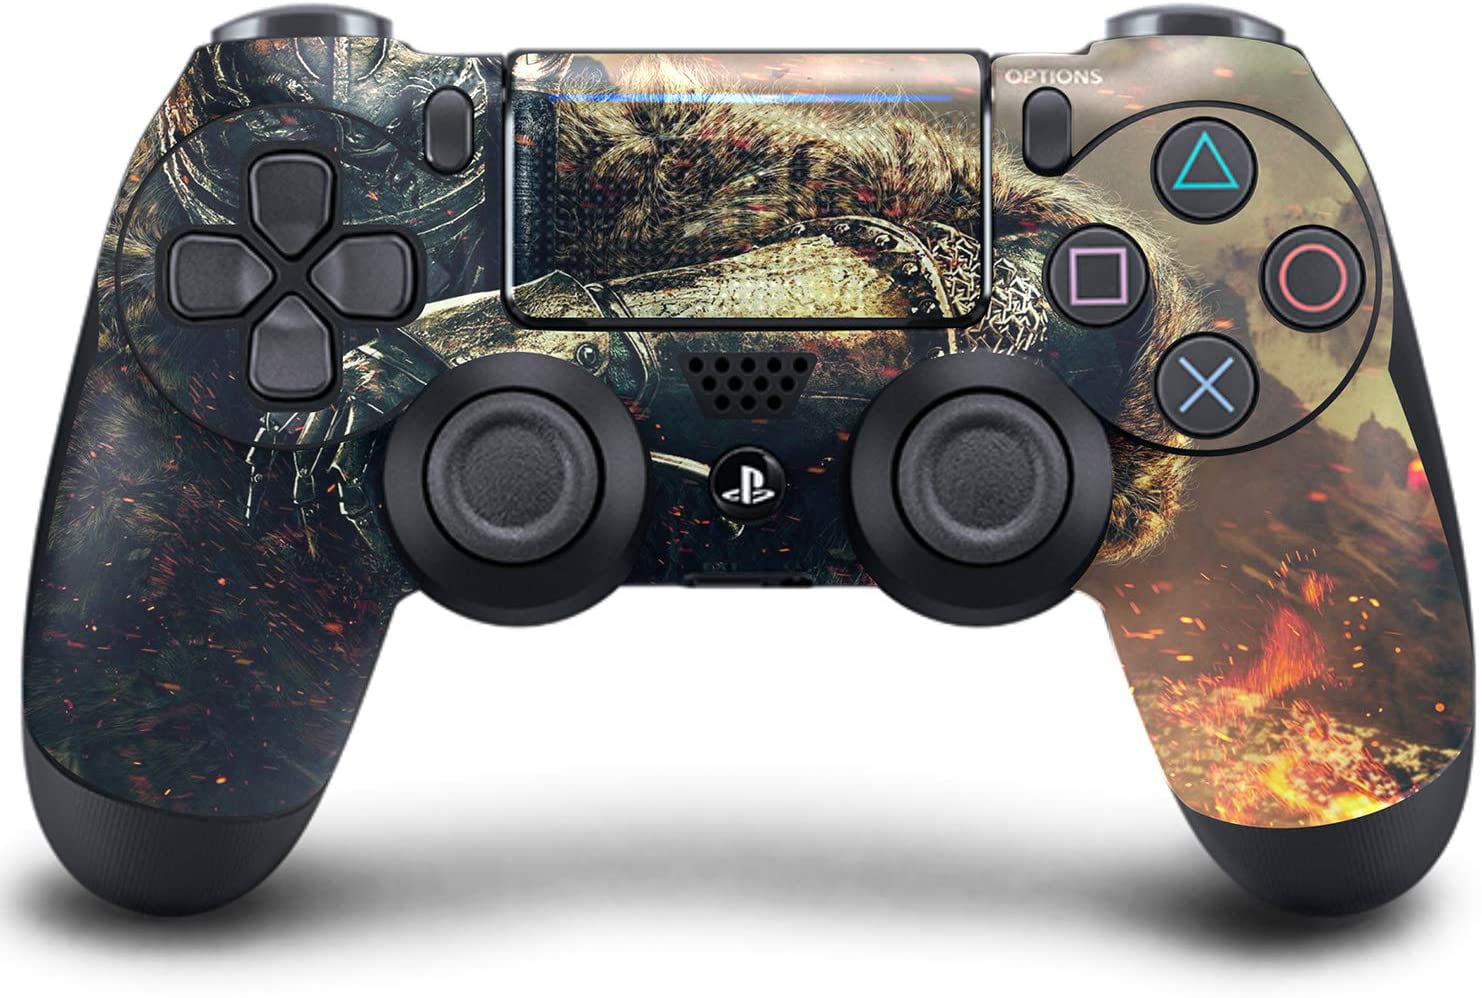 Wireless controller ps4